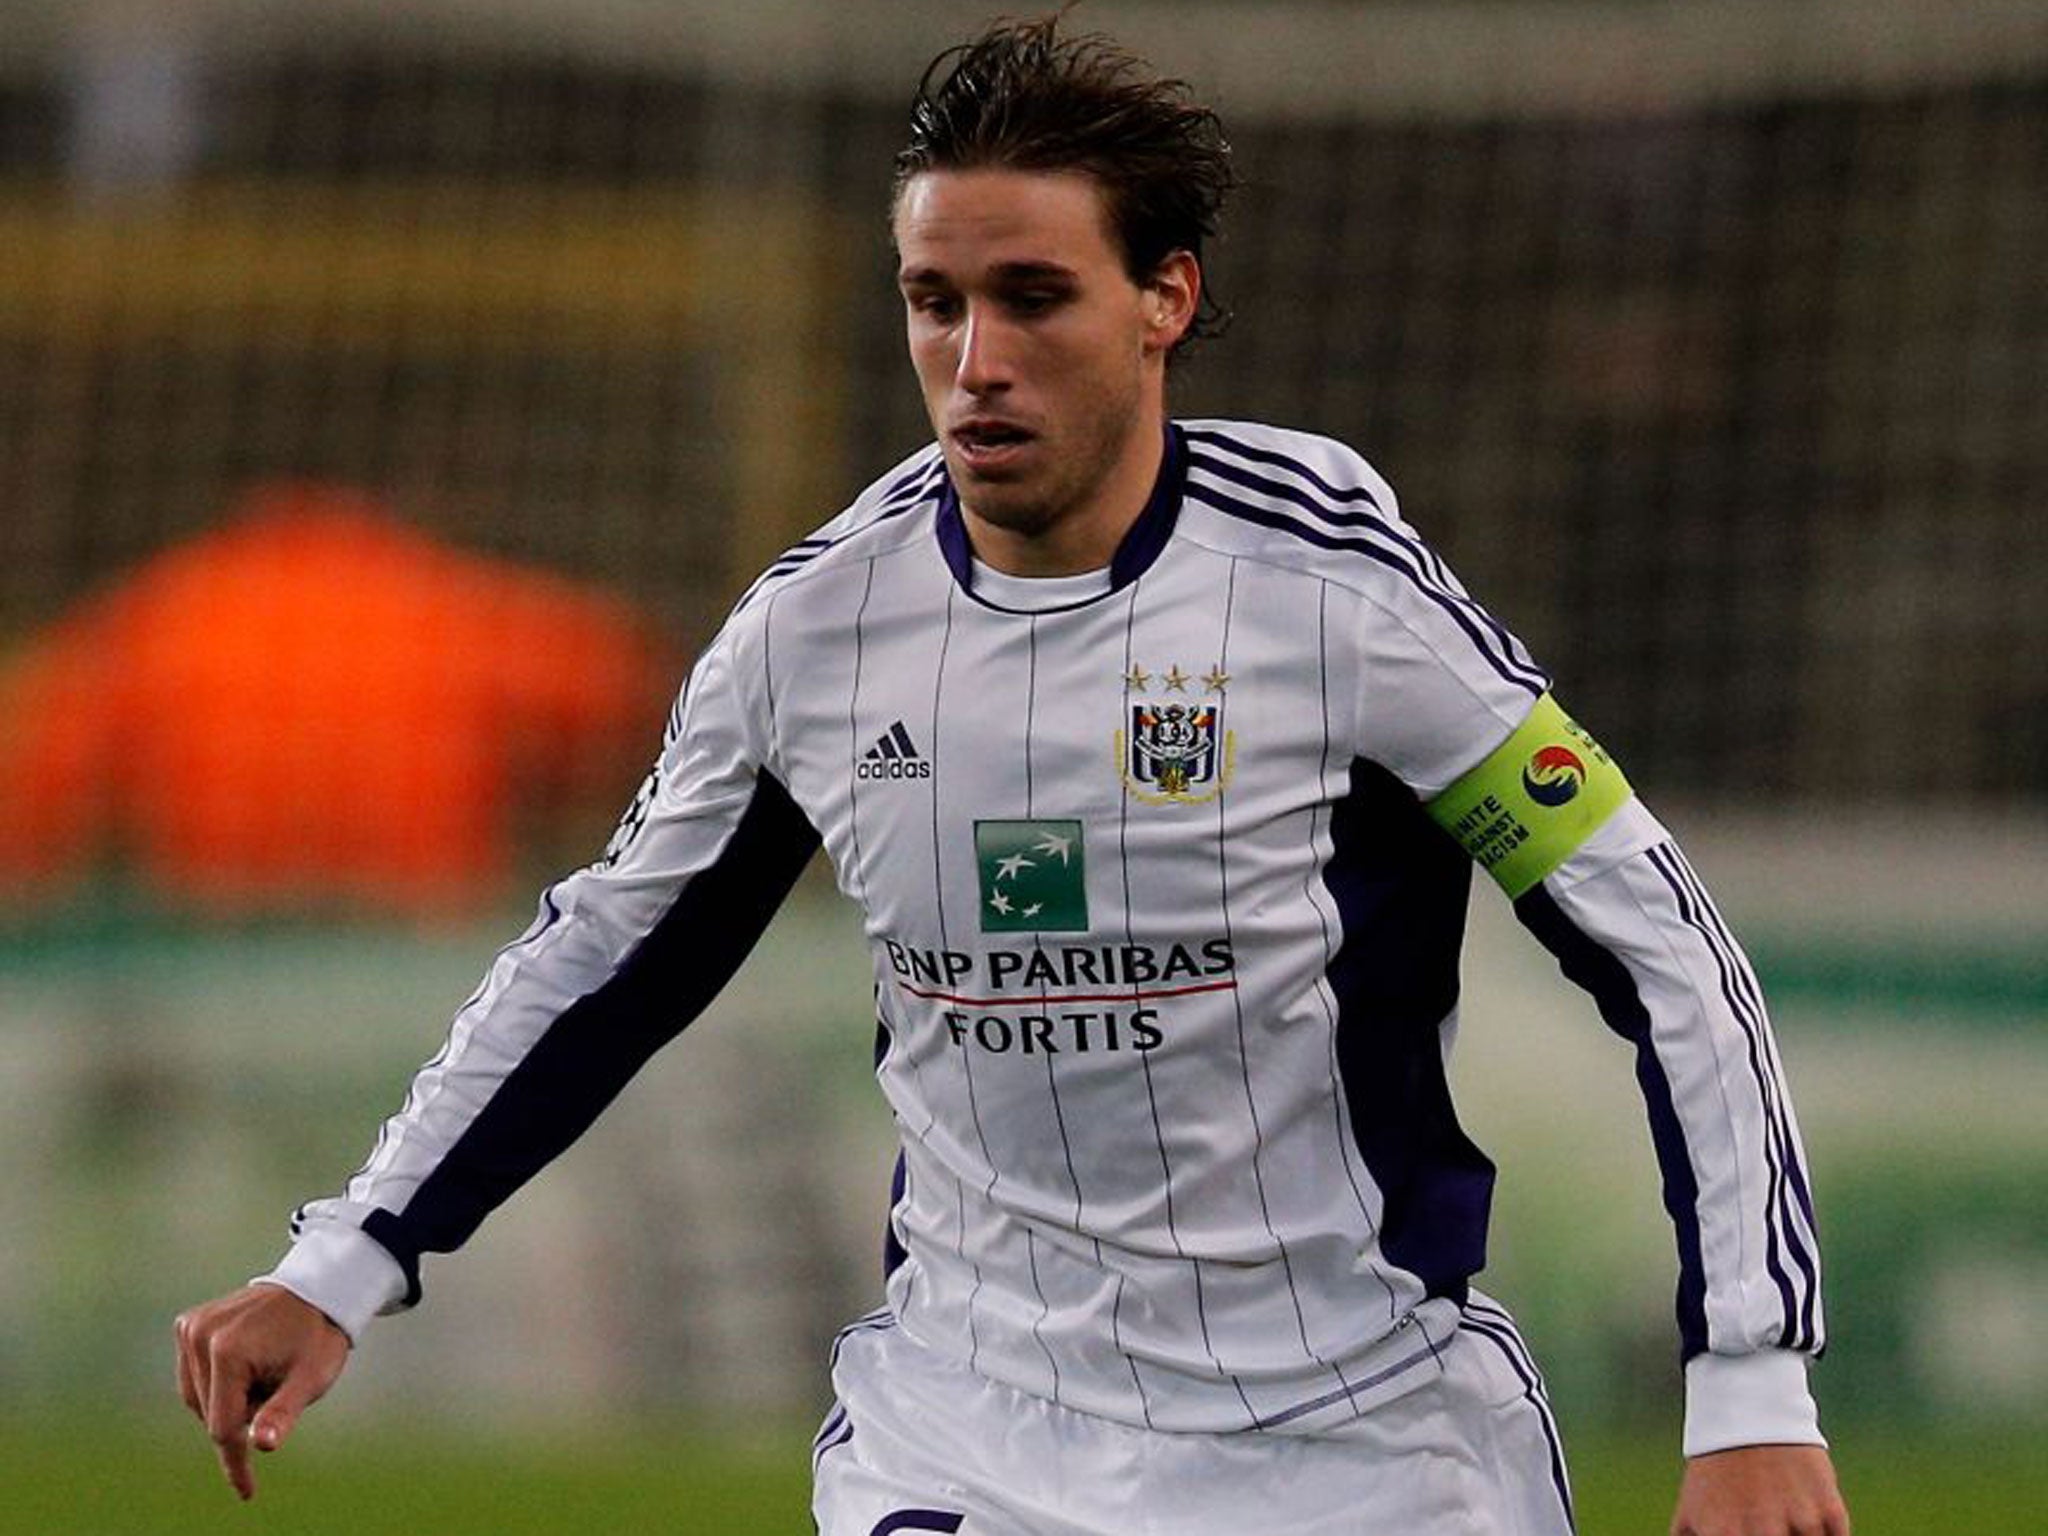 Lucas Biglia has been strongly linked with Manchester United